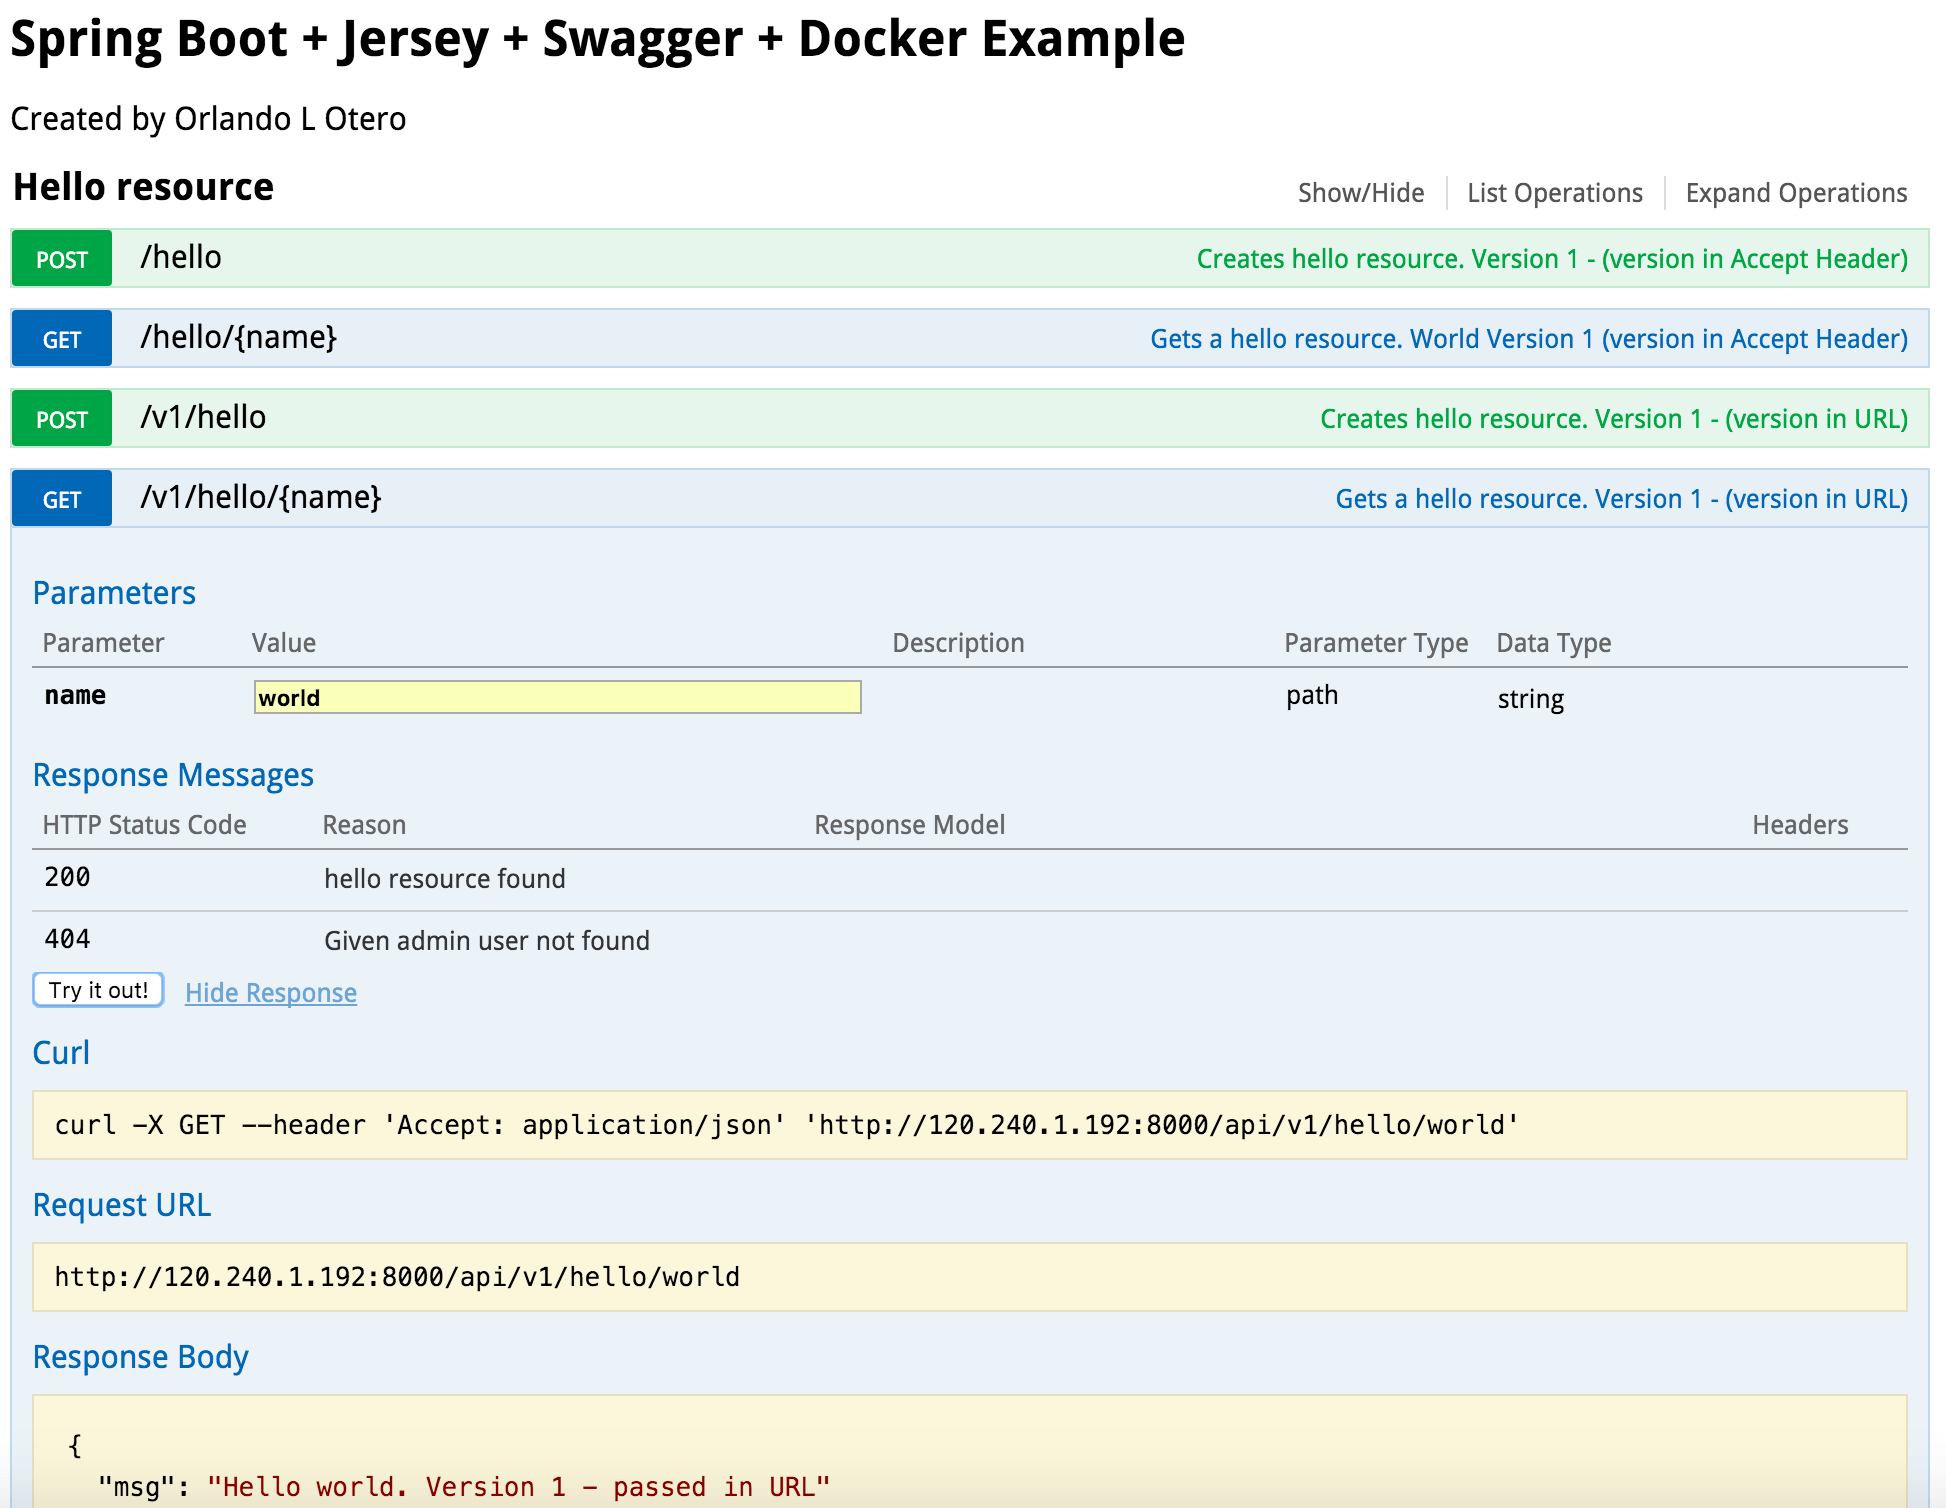 Spring Boot, Jersey, Swagger - Get resource - Version in URL